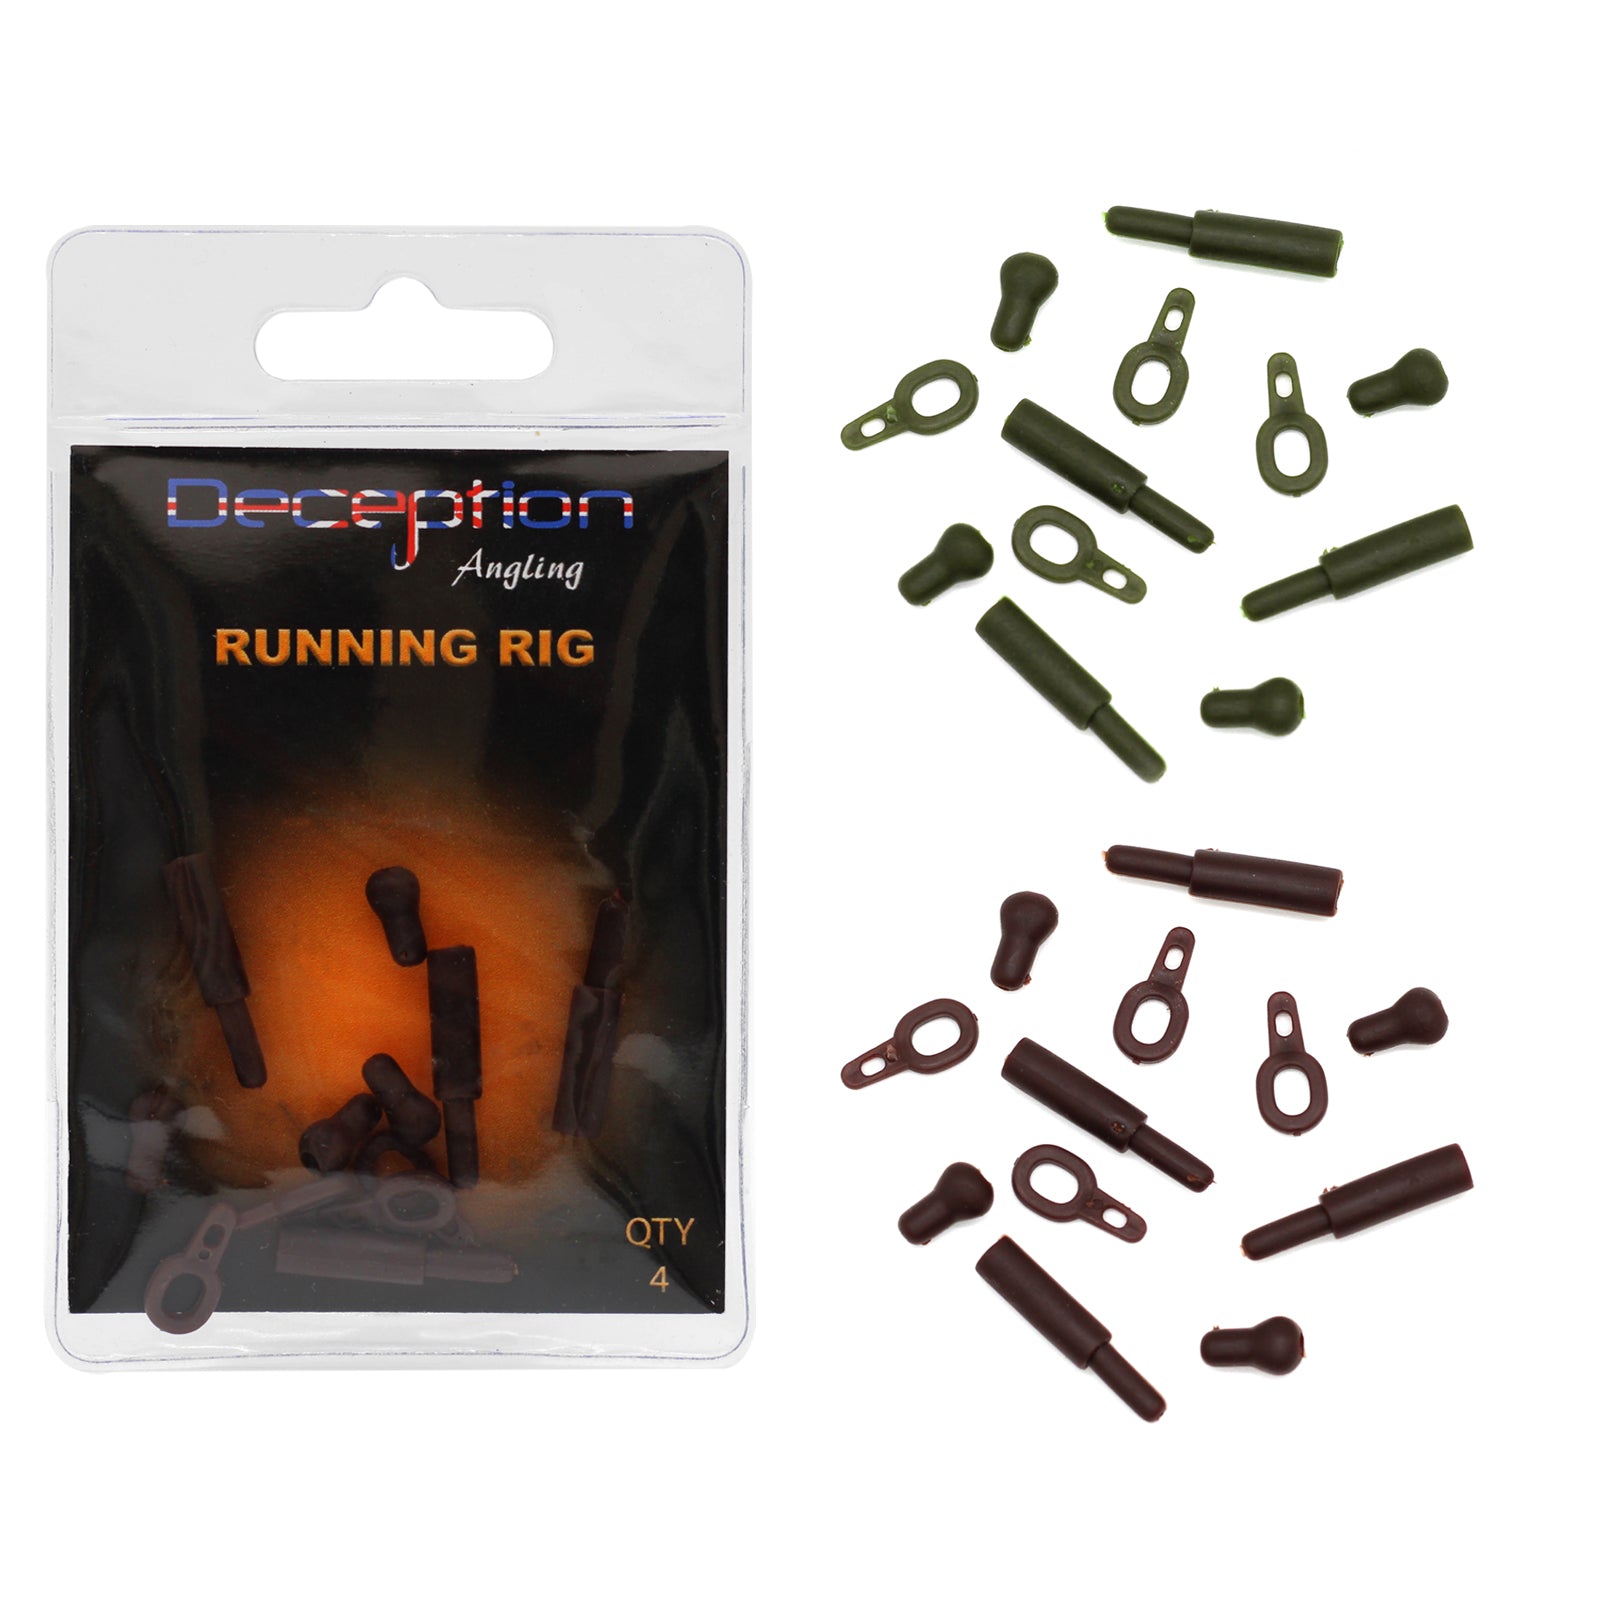 Deception Angling Running Rig for Fishing Pack of 4 in Two Colours